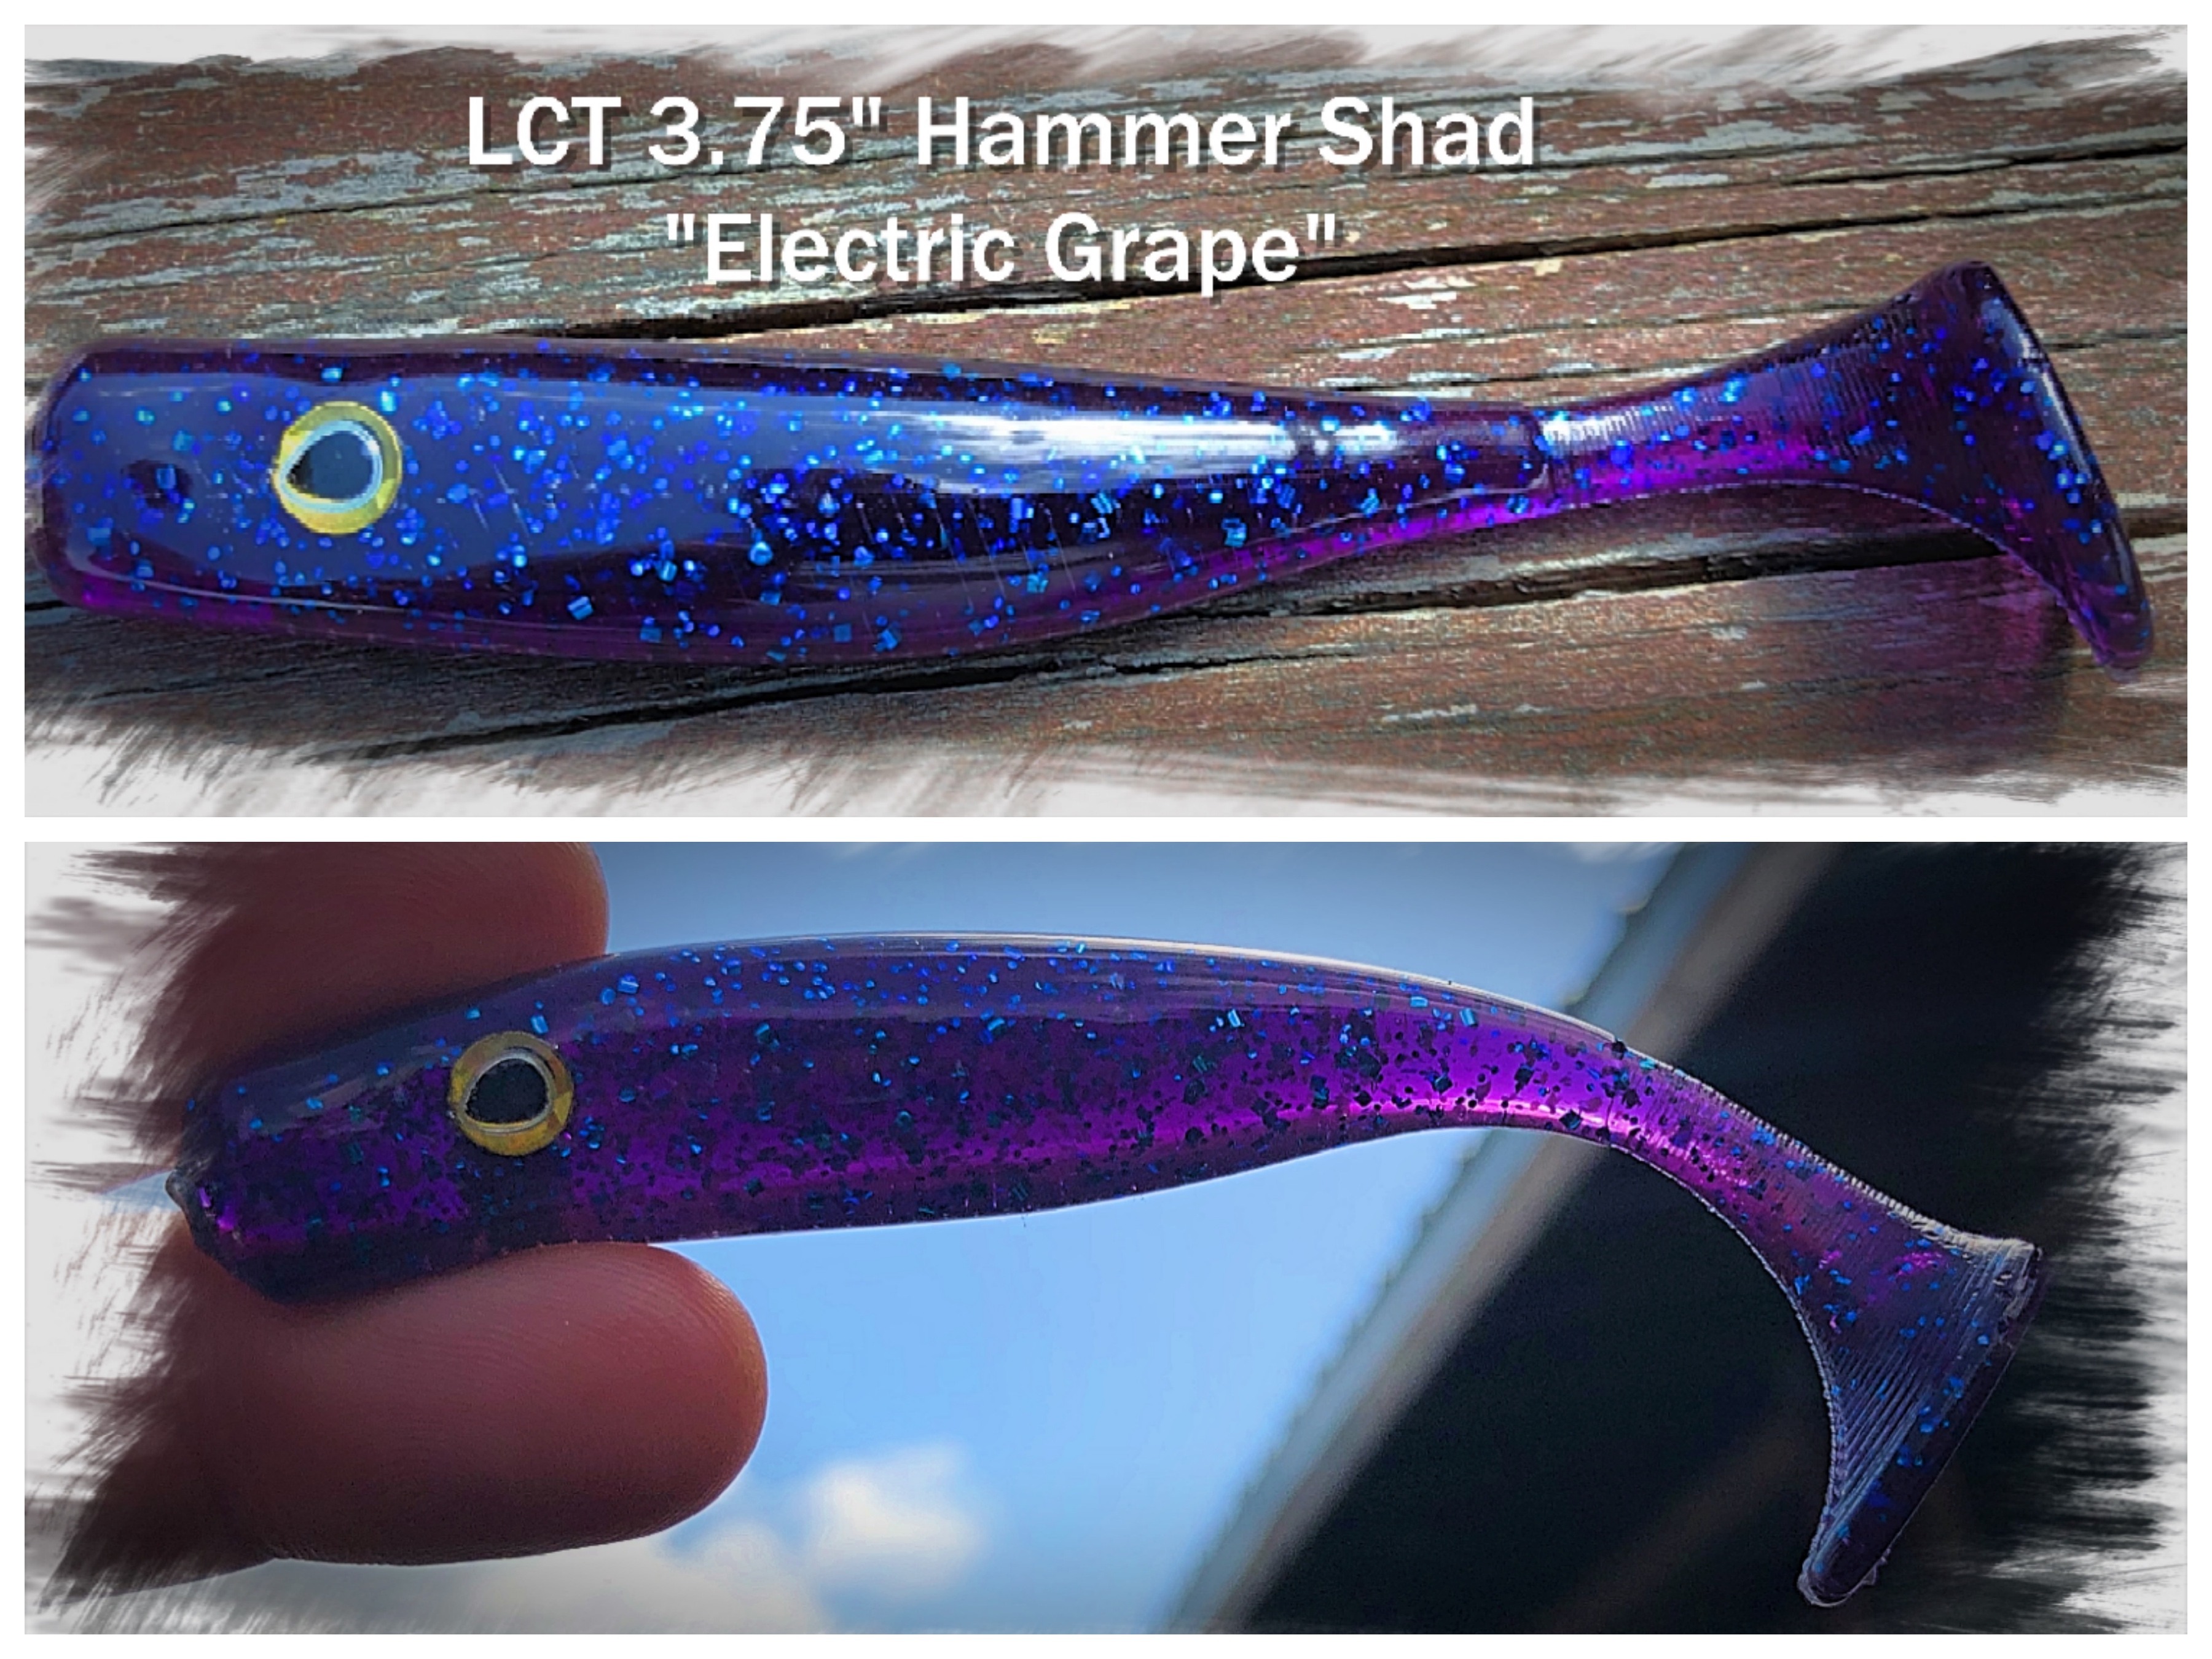 https://legacycustomtackle.com/wp-content/uploads/2019/04/LCT-3.75-Hammer-Shad-Electric-Grape-PRODUCT-PIC.jpg